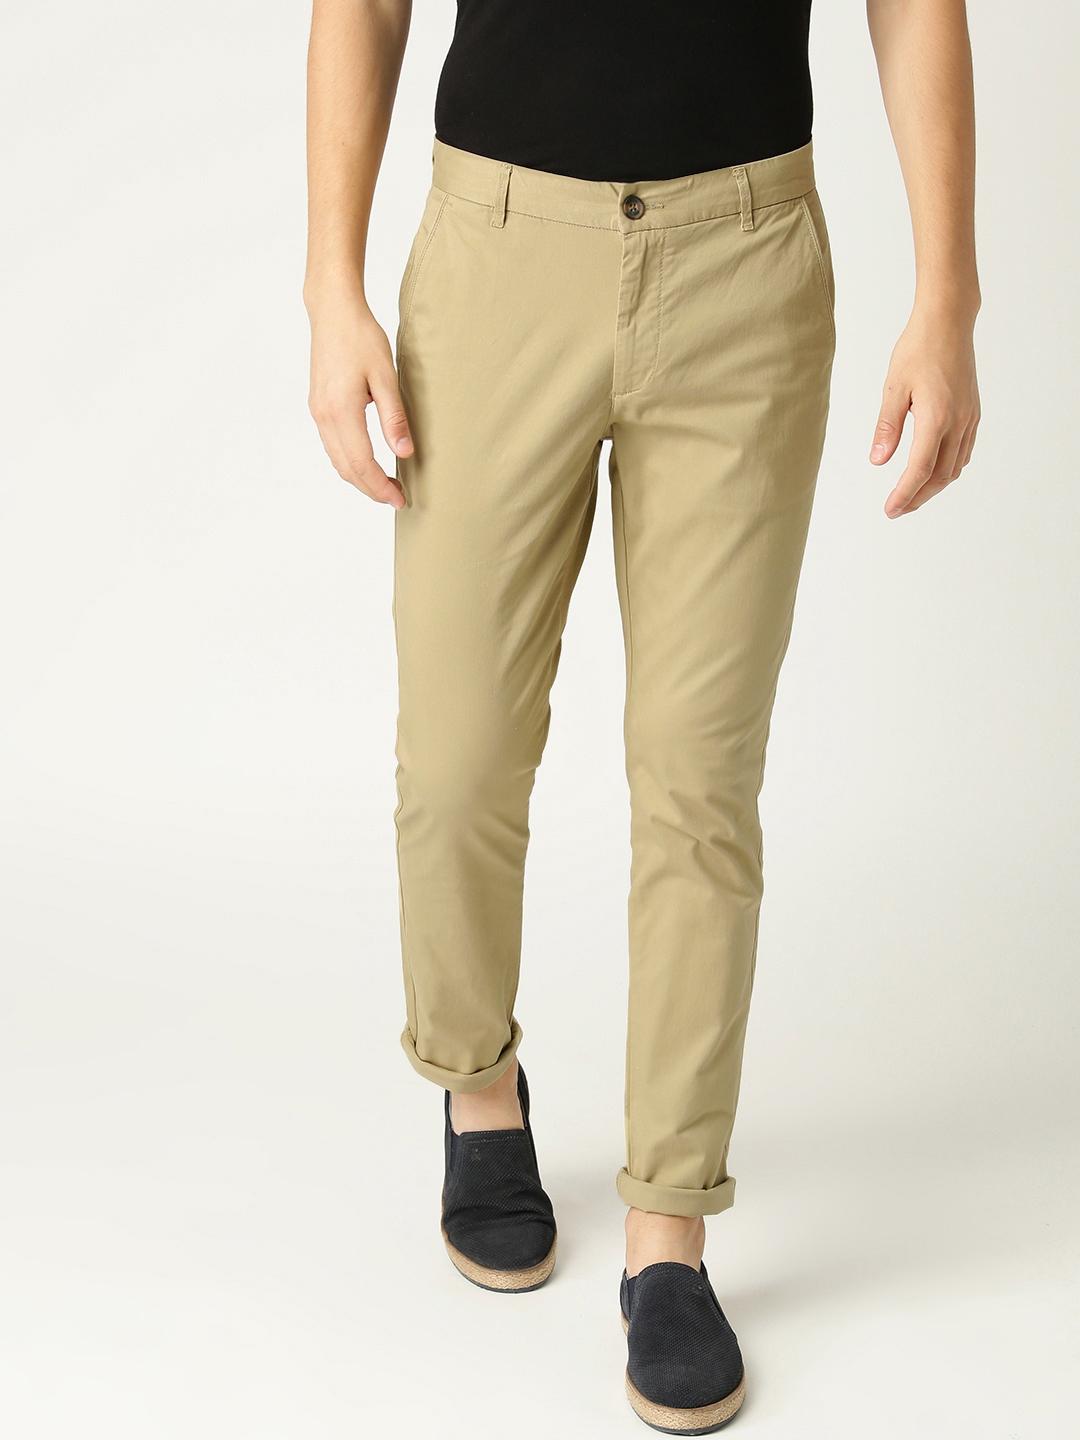 Buy United Colors Of Benetton Men Beige Slim Fit Twill Solid Chinos ...